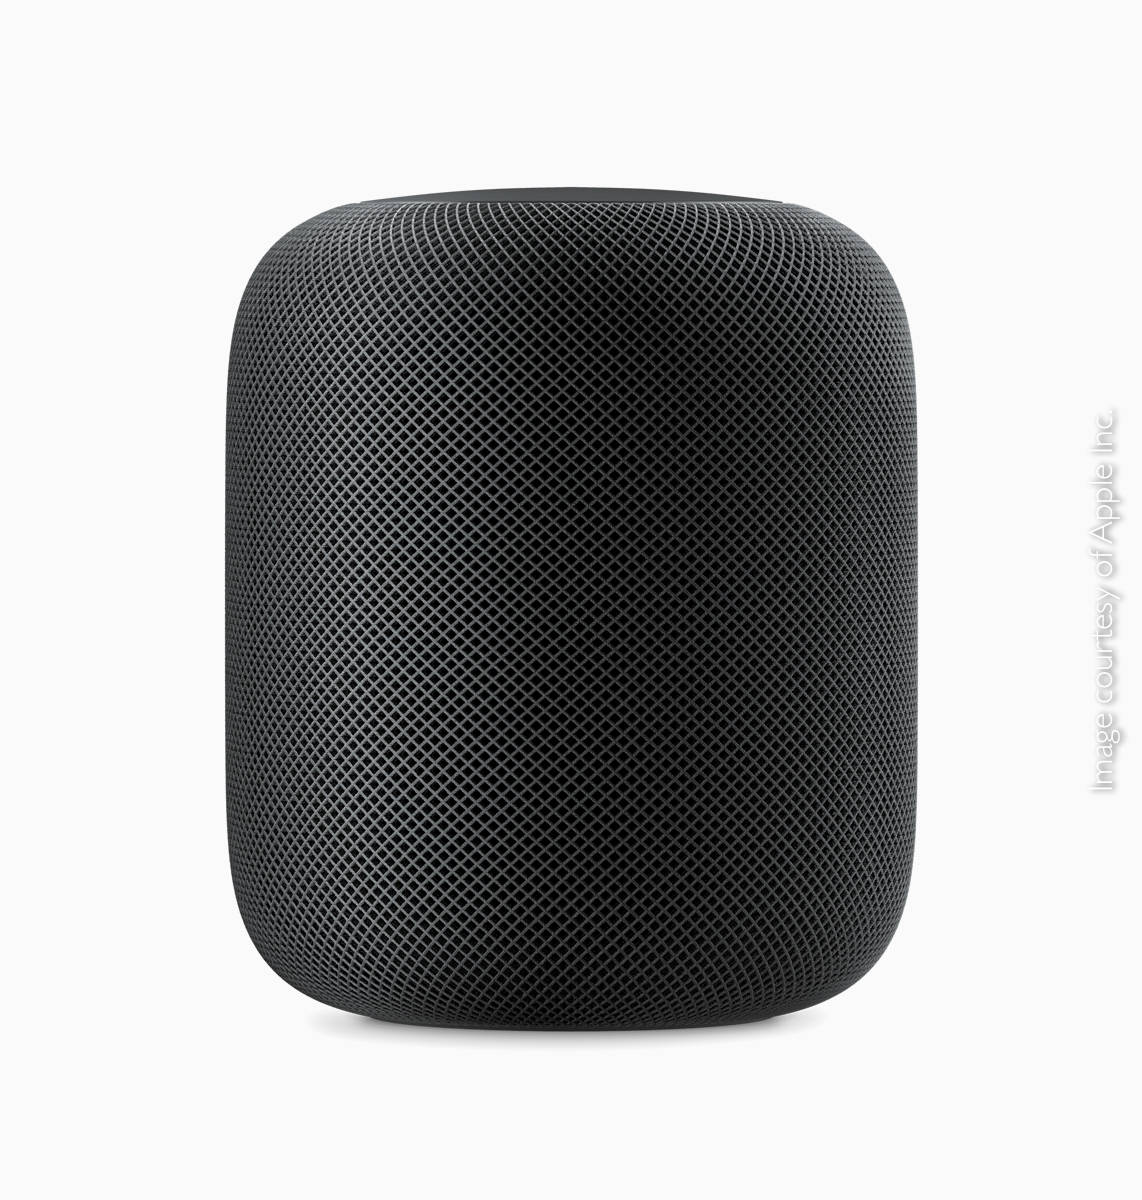 For consumers of Apple HomeKit smart-home automation accessories, HomePod facilitates wide-field voice activation features and can act as a HomeKit hub.